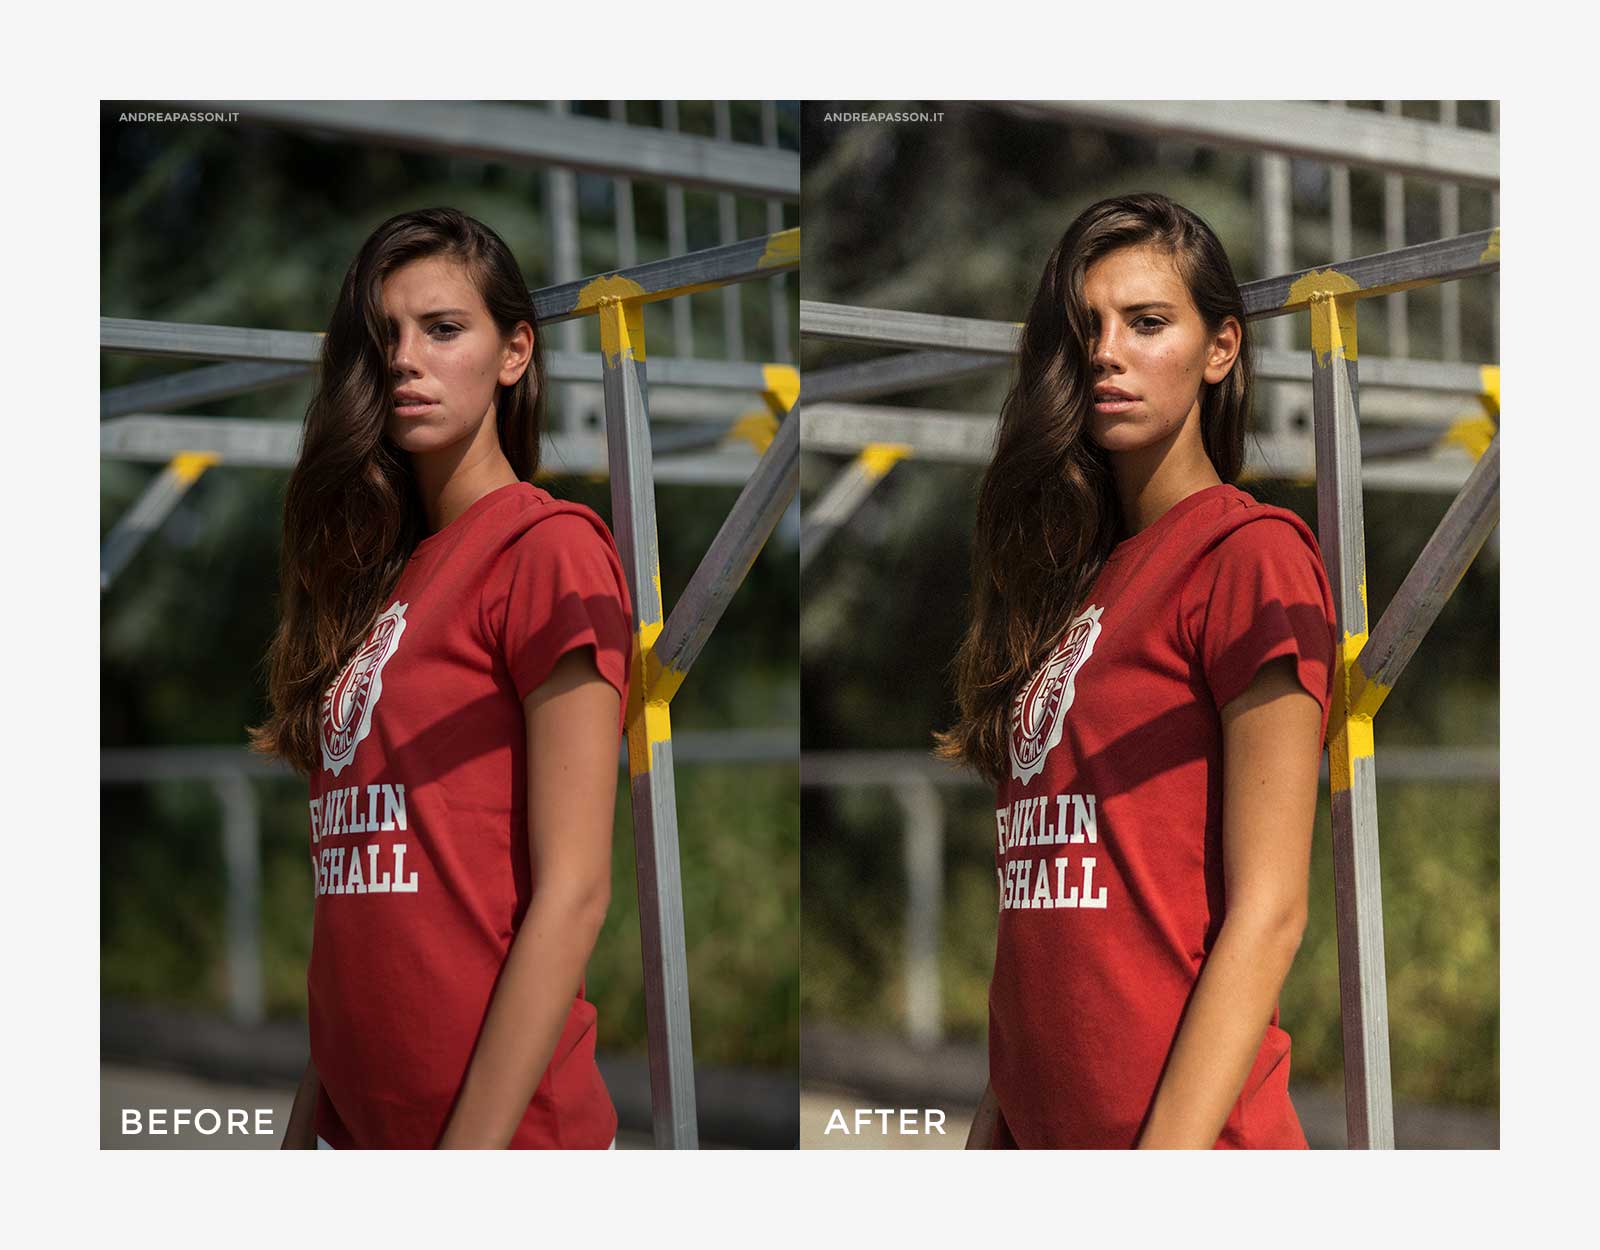 Before & After - Post Produzione Fotografica Professionale a Treviso - Franklin & Marshall